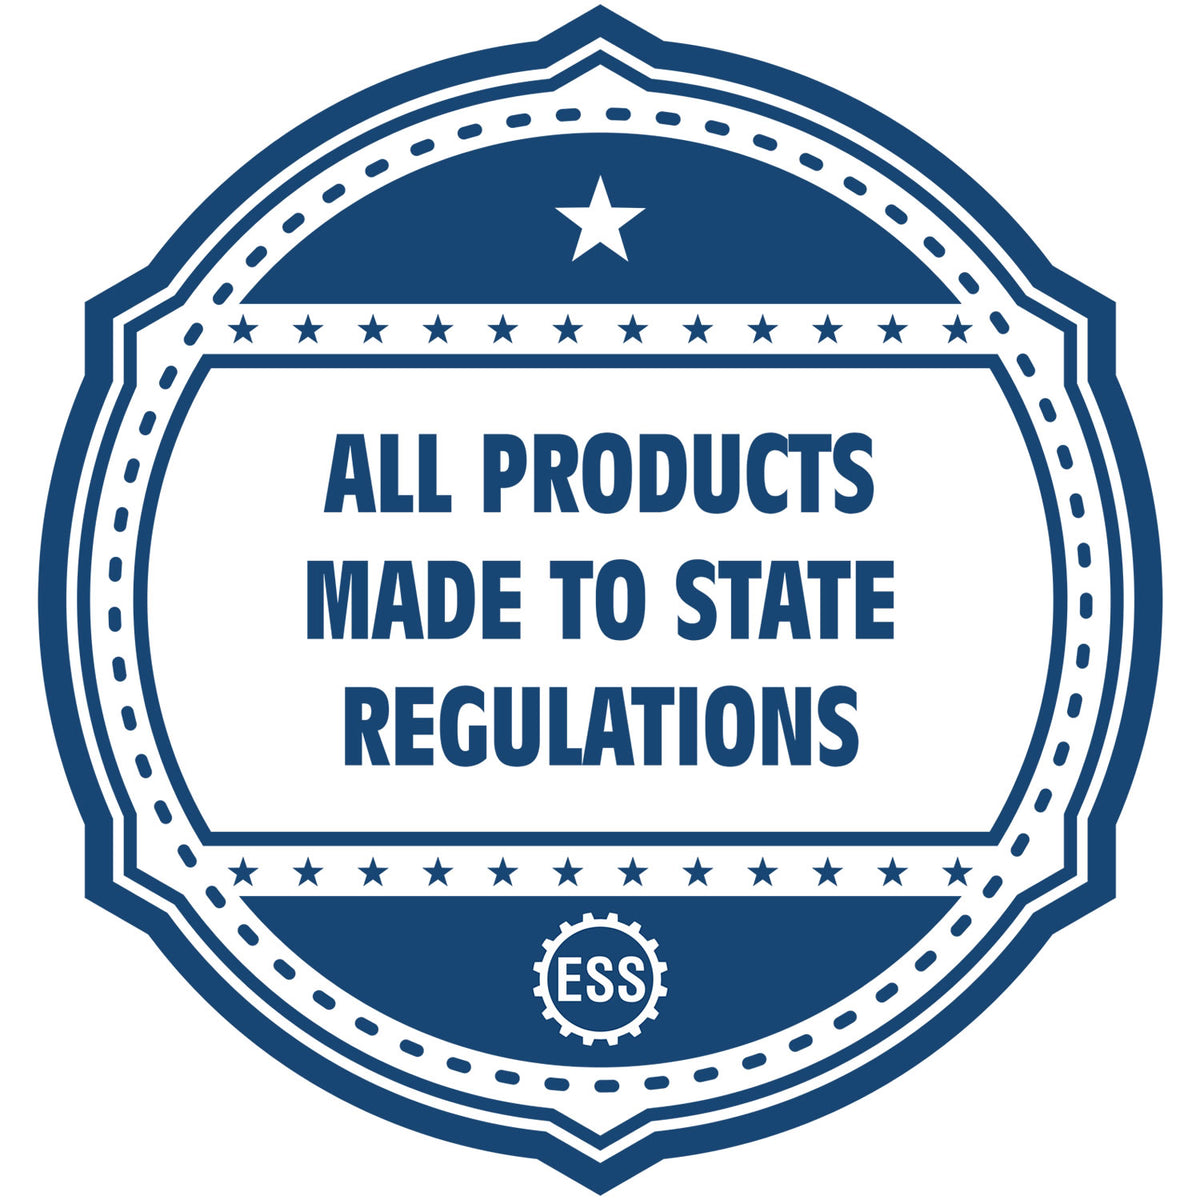 An icon or badge element for the Slim Pre-Inked Alabama Architect Seal Stamp showing that this product is made in compliance with state regulations.